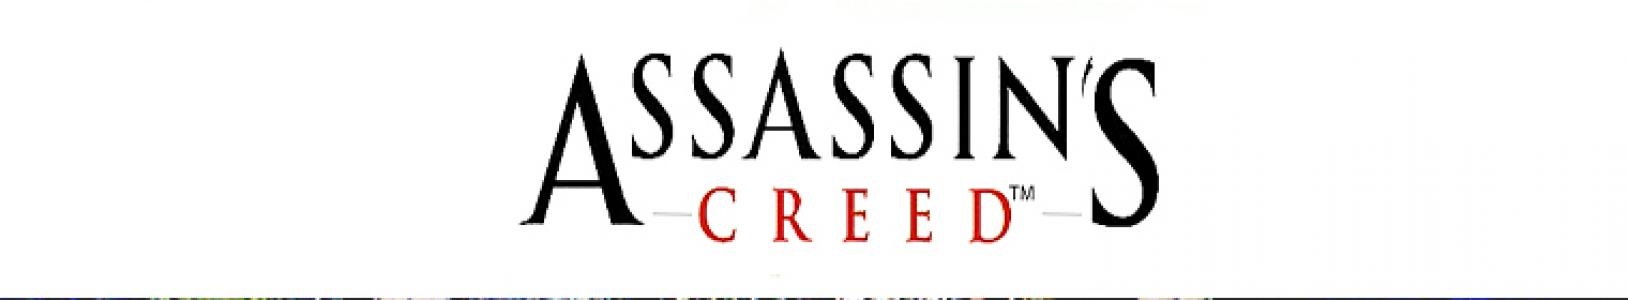 Assassin's Creed banner